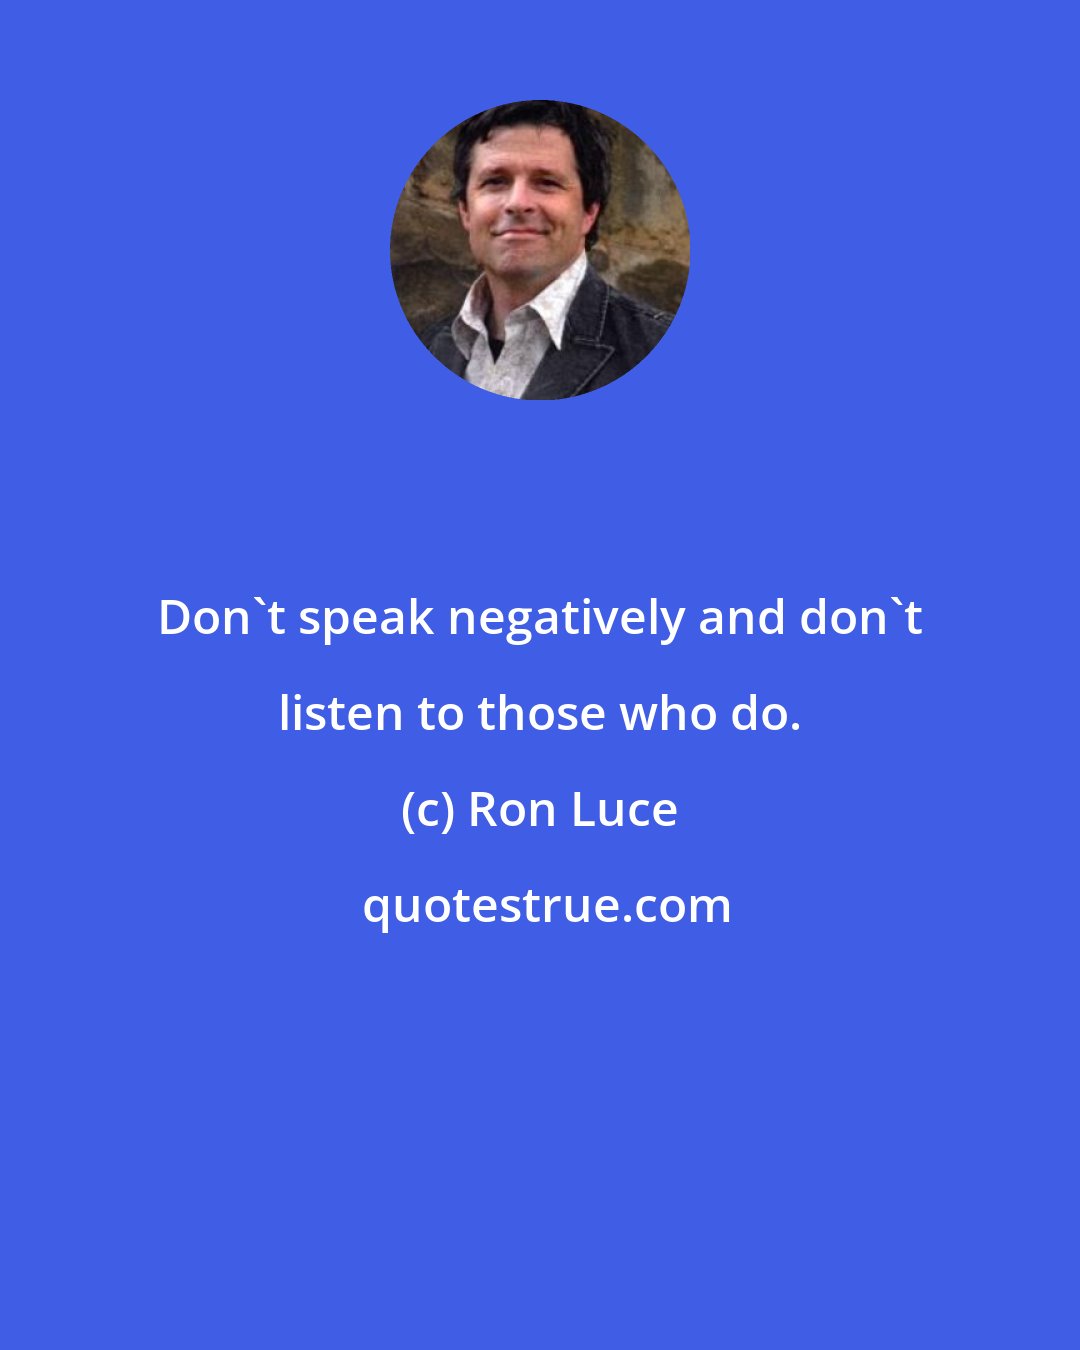 Ron Luce: Don't speak negatively and don't listen to those who do.